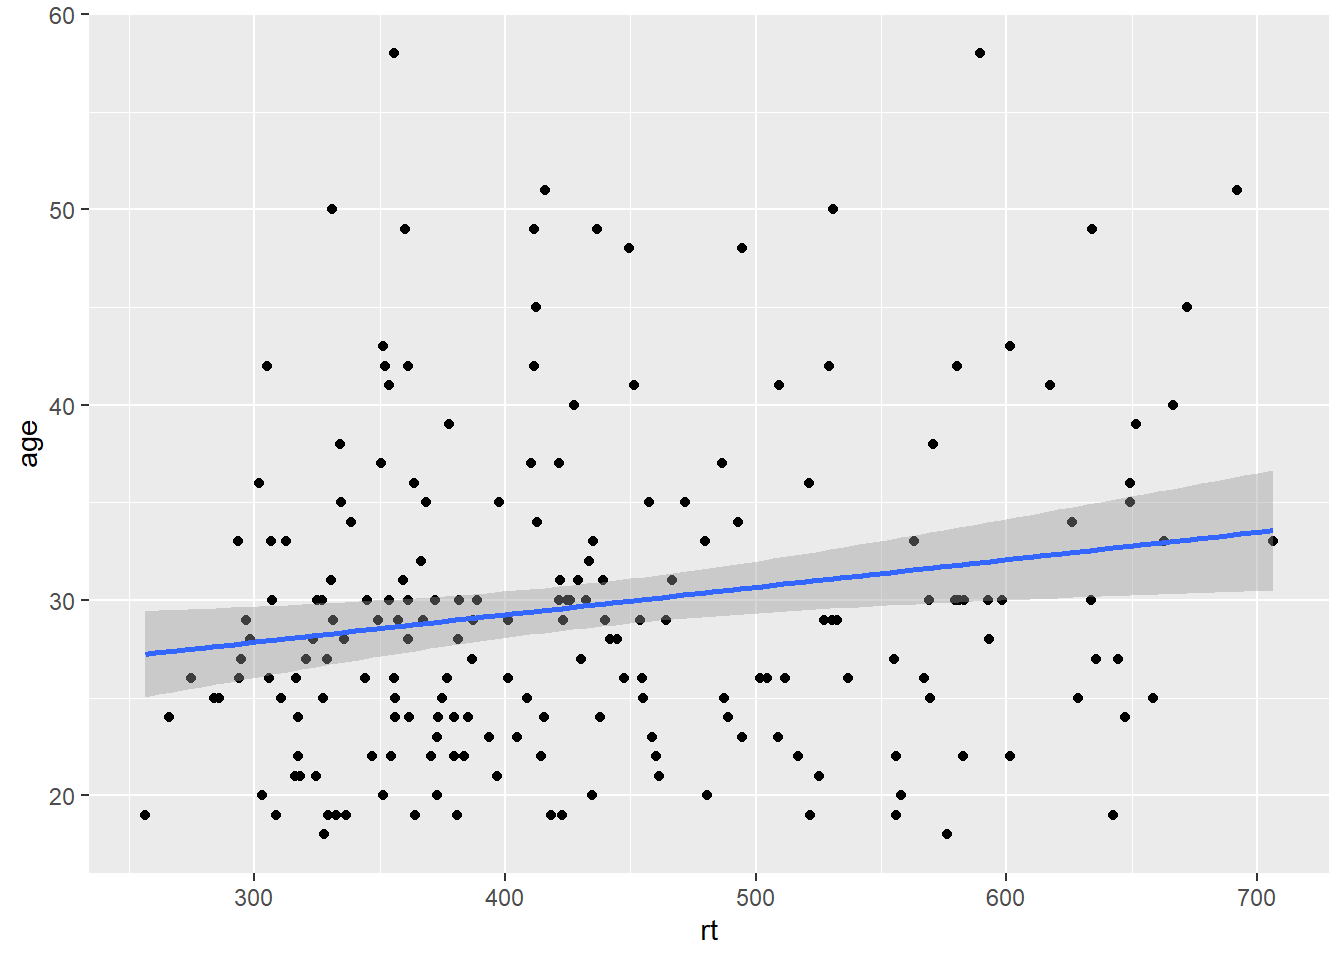 Line of best fit (blue solid line) for reaction time versus age with missing true diagonal.